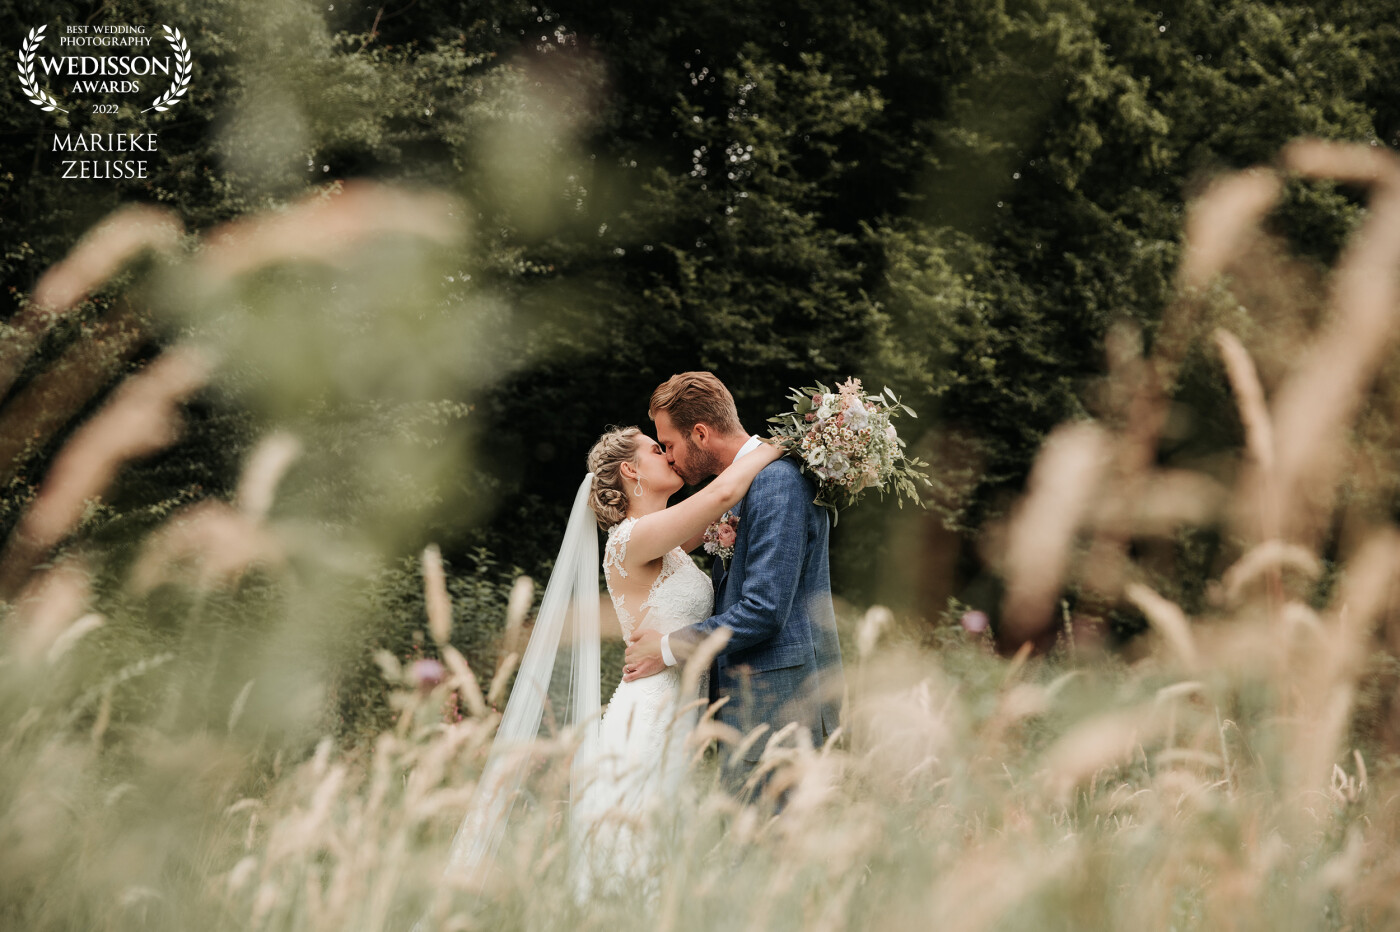 This lovely couple took there time for the photos. And they had a great chemic, I loved the way the moved and looked at eachother. For this picture I was lying in the grass to take a good shot!